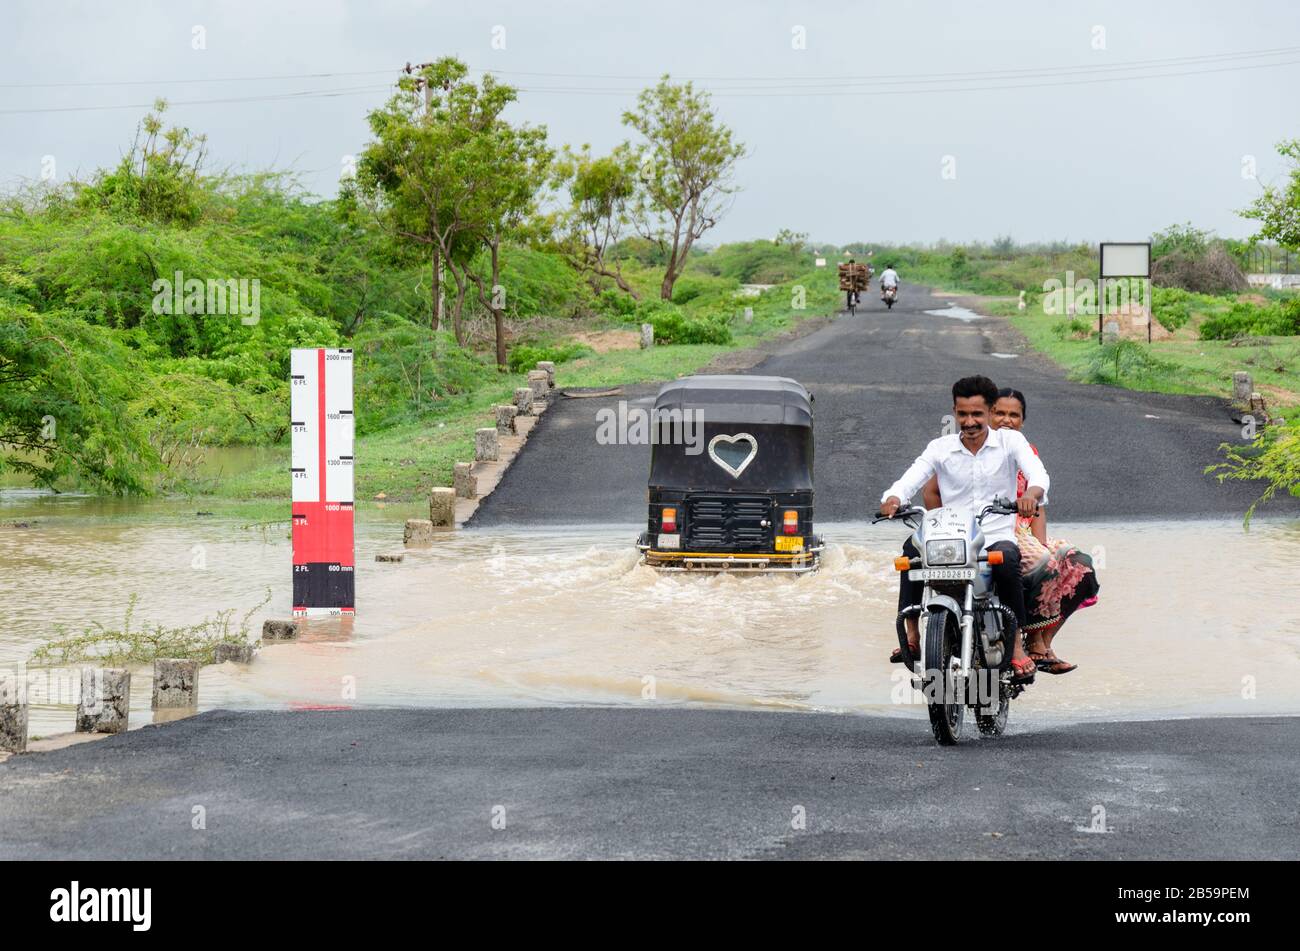 Roadside water level indictor that marks the depth of flood water during heavy rains in Mandvi, Kutch, Gujarat, India Stock Photo